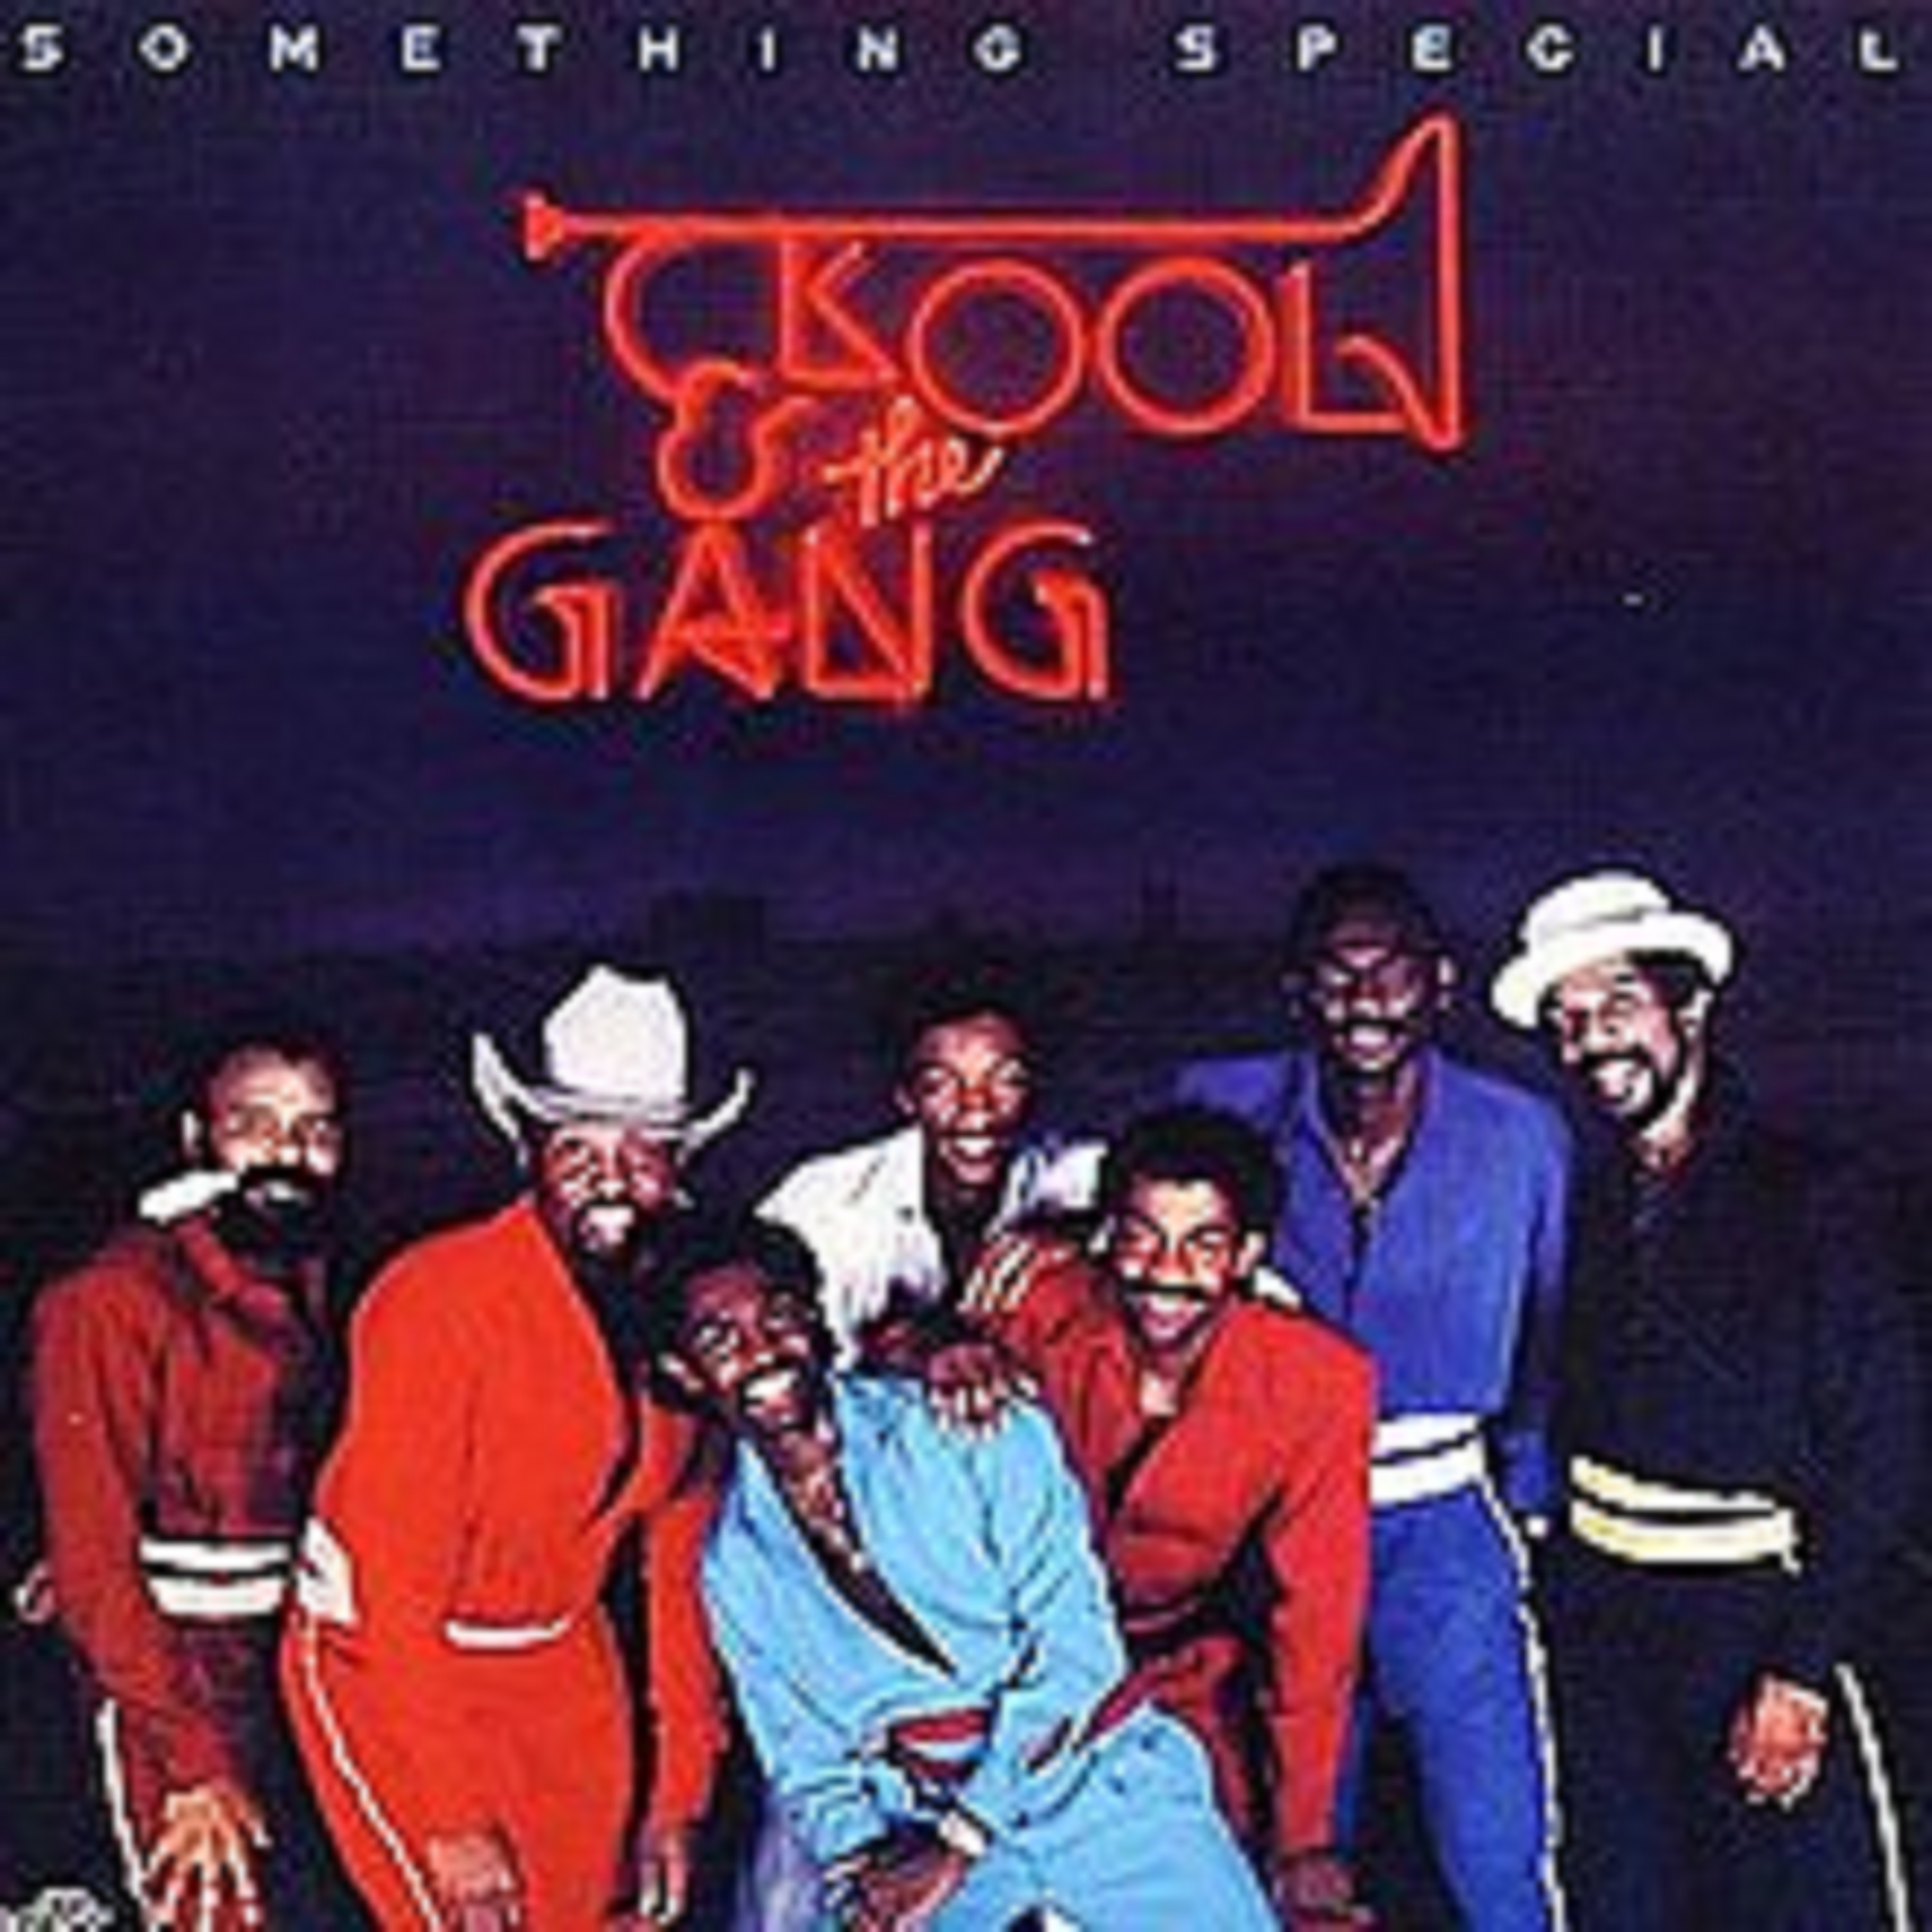 Kool And The Gang Something Special Expanded Edition Mvd